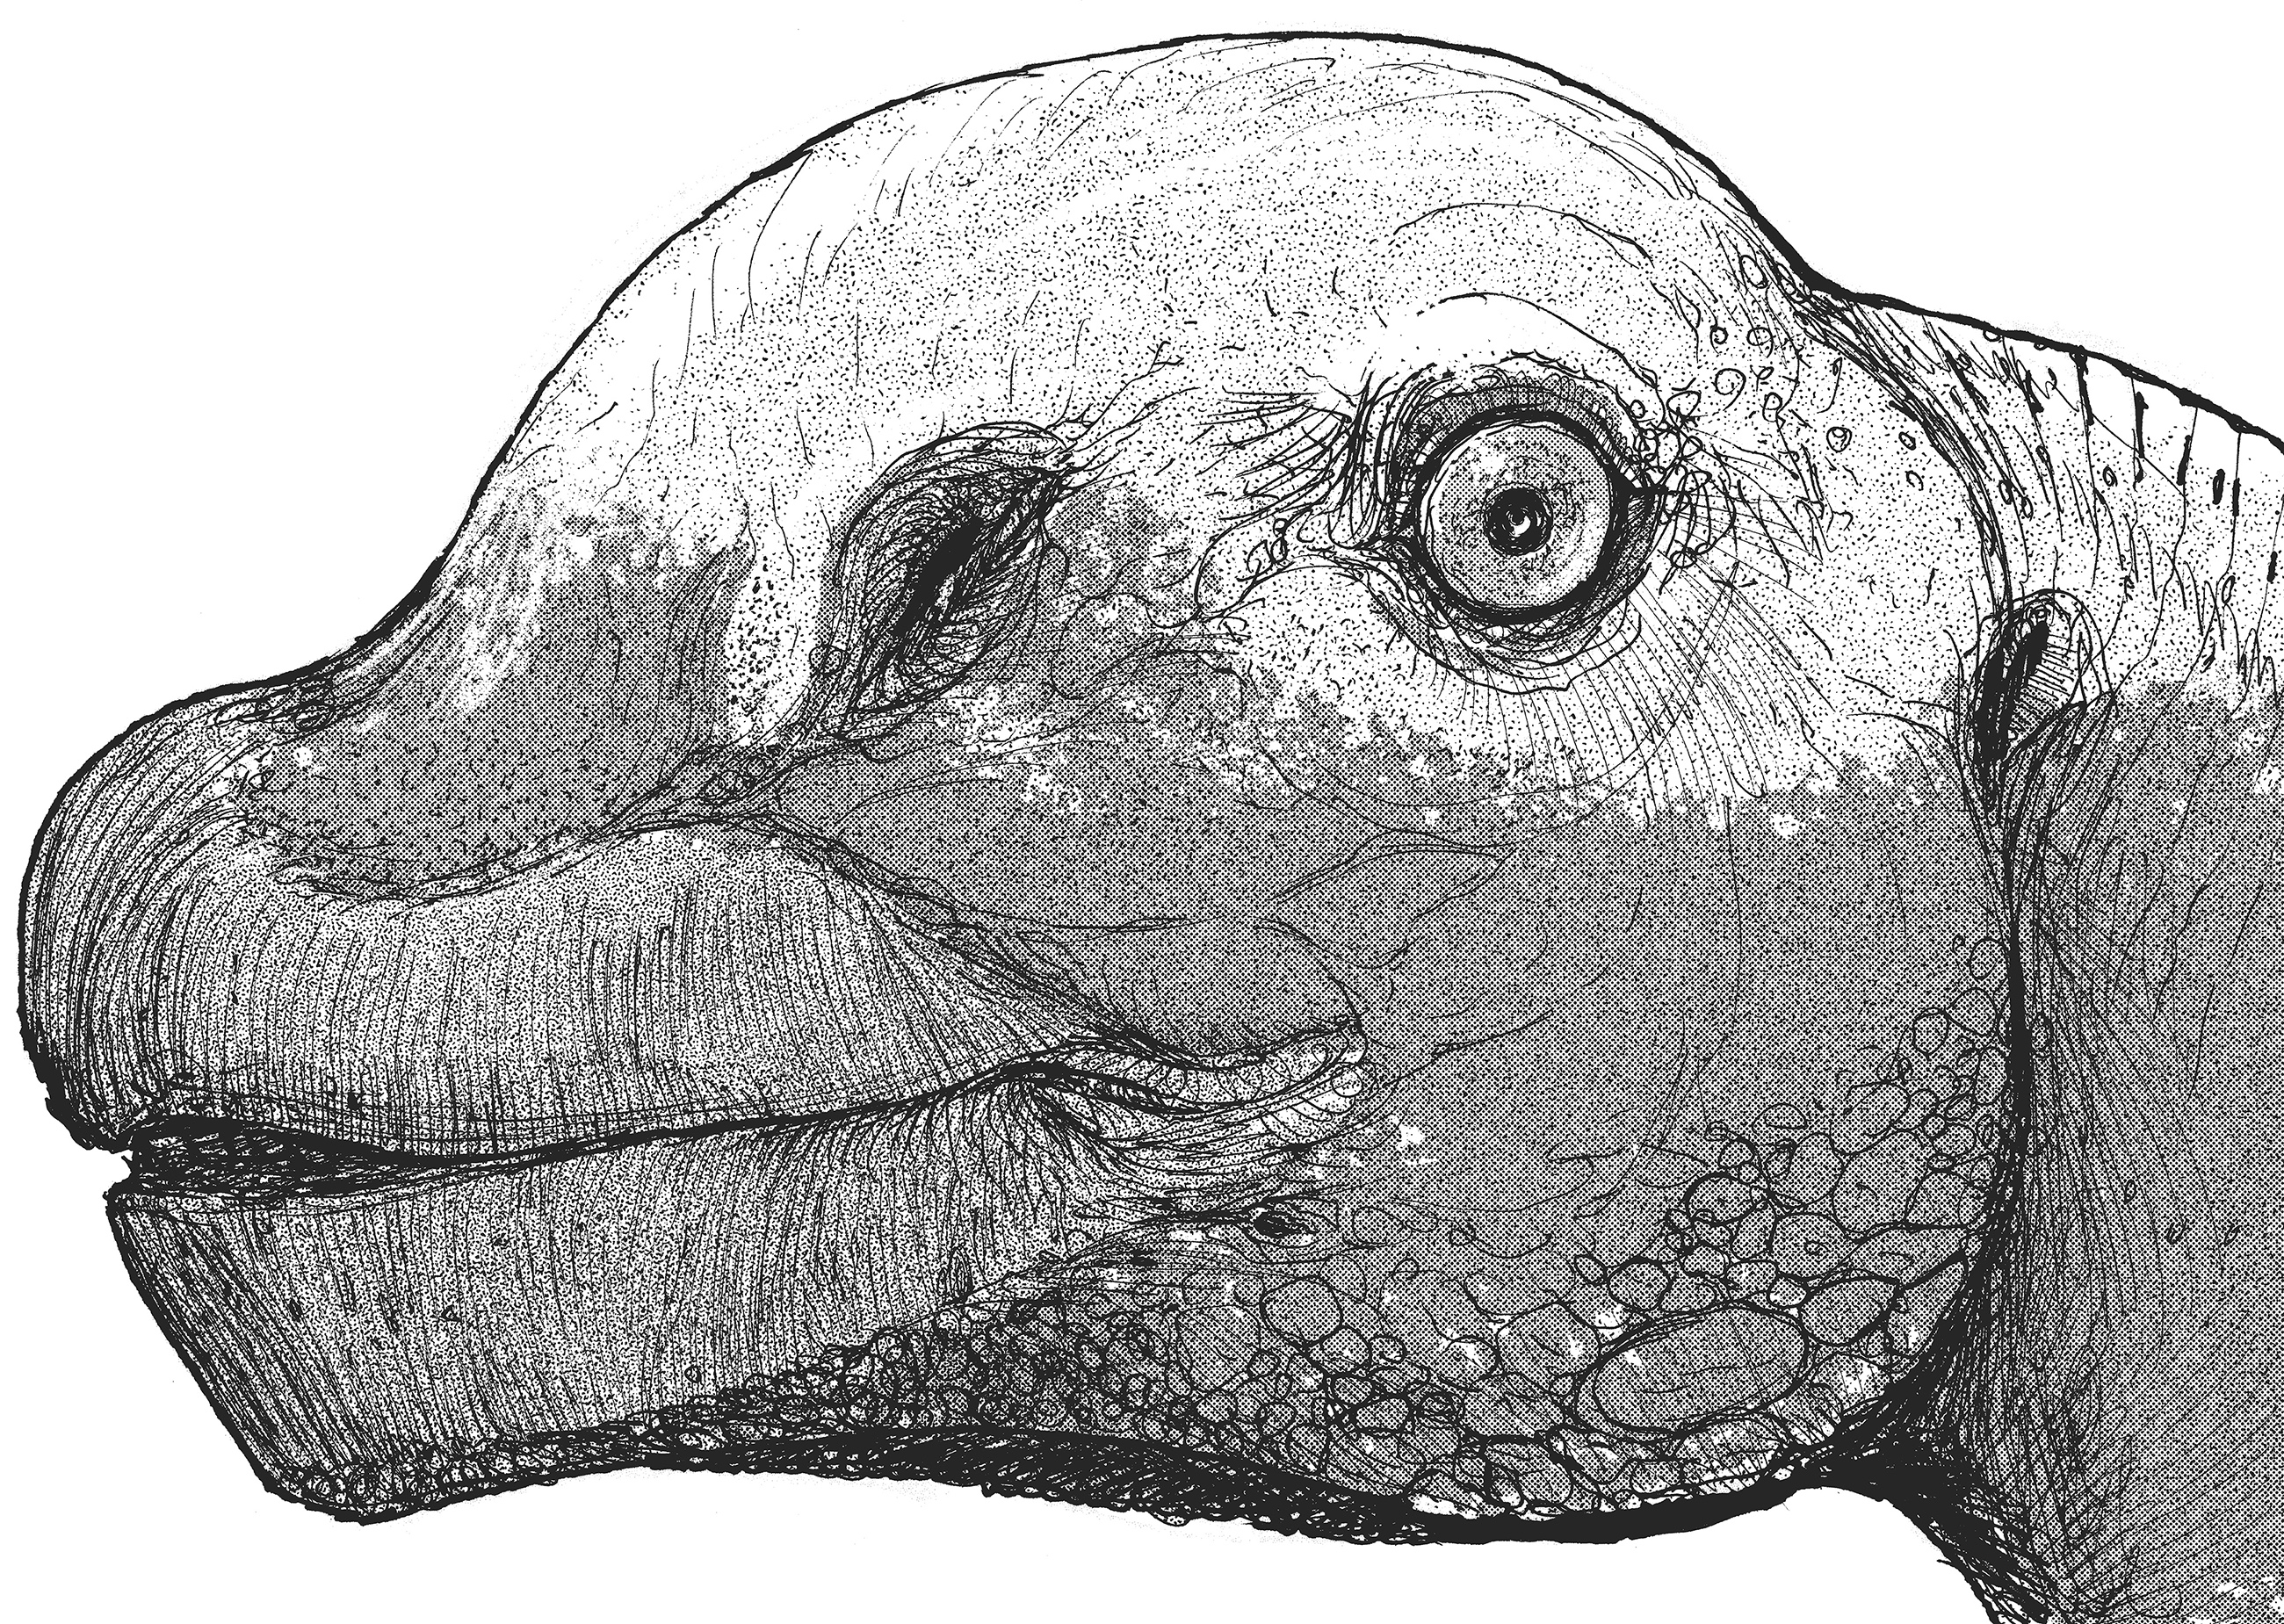 Dino Art] What the preggers T-rex may have looked like. What's the  consensus on proto-feathers? : r/Dinosaurs